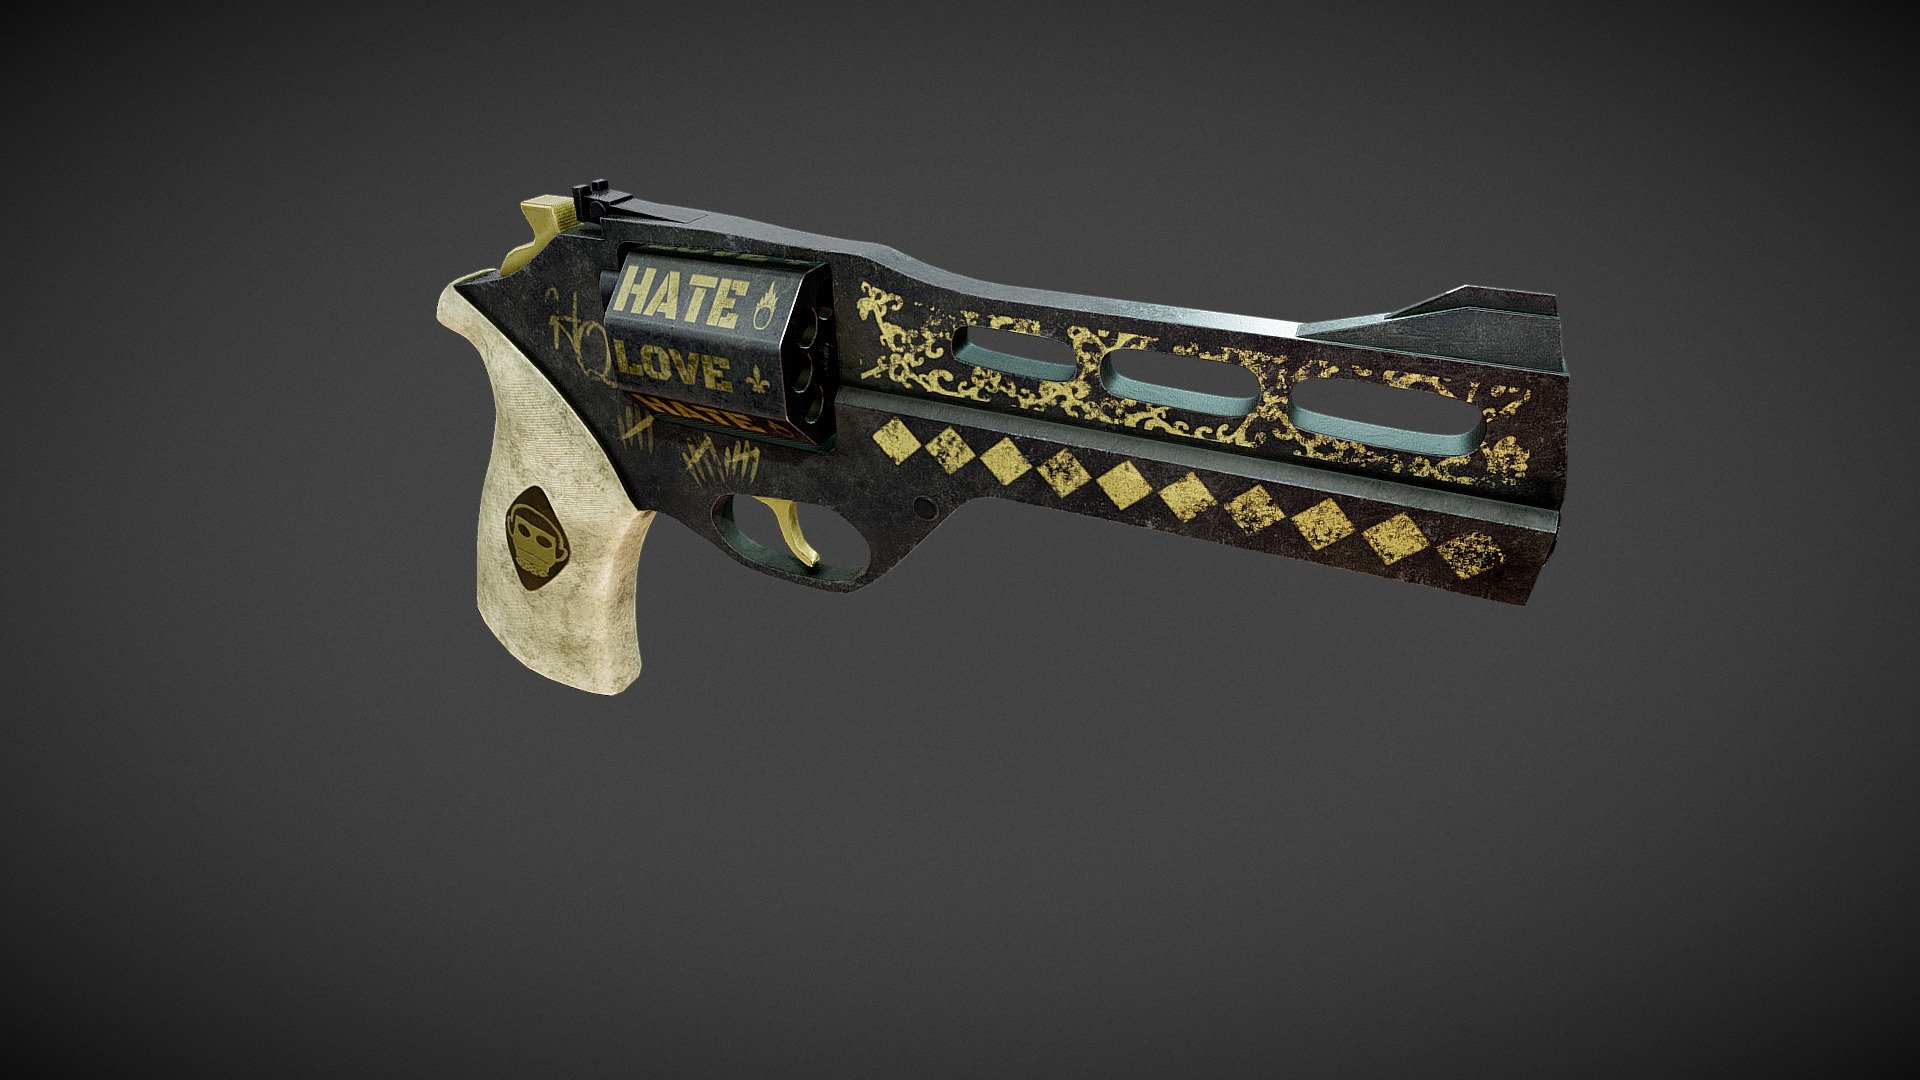 This is my rendition of Harley Quinn's signature pistol from the DCEU movie Suicide Squad 3d model